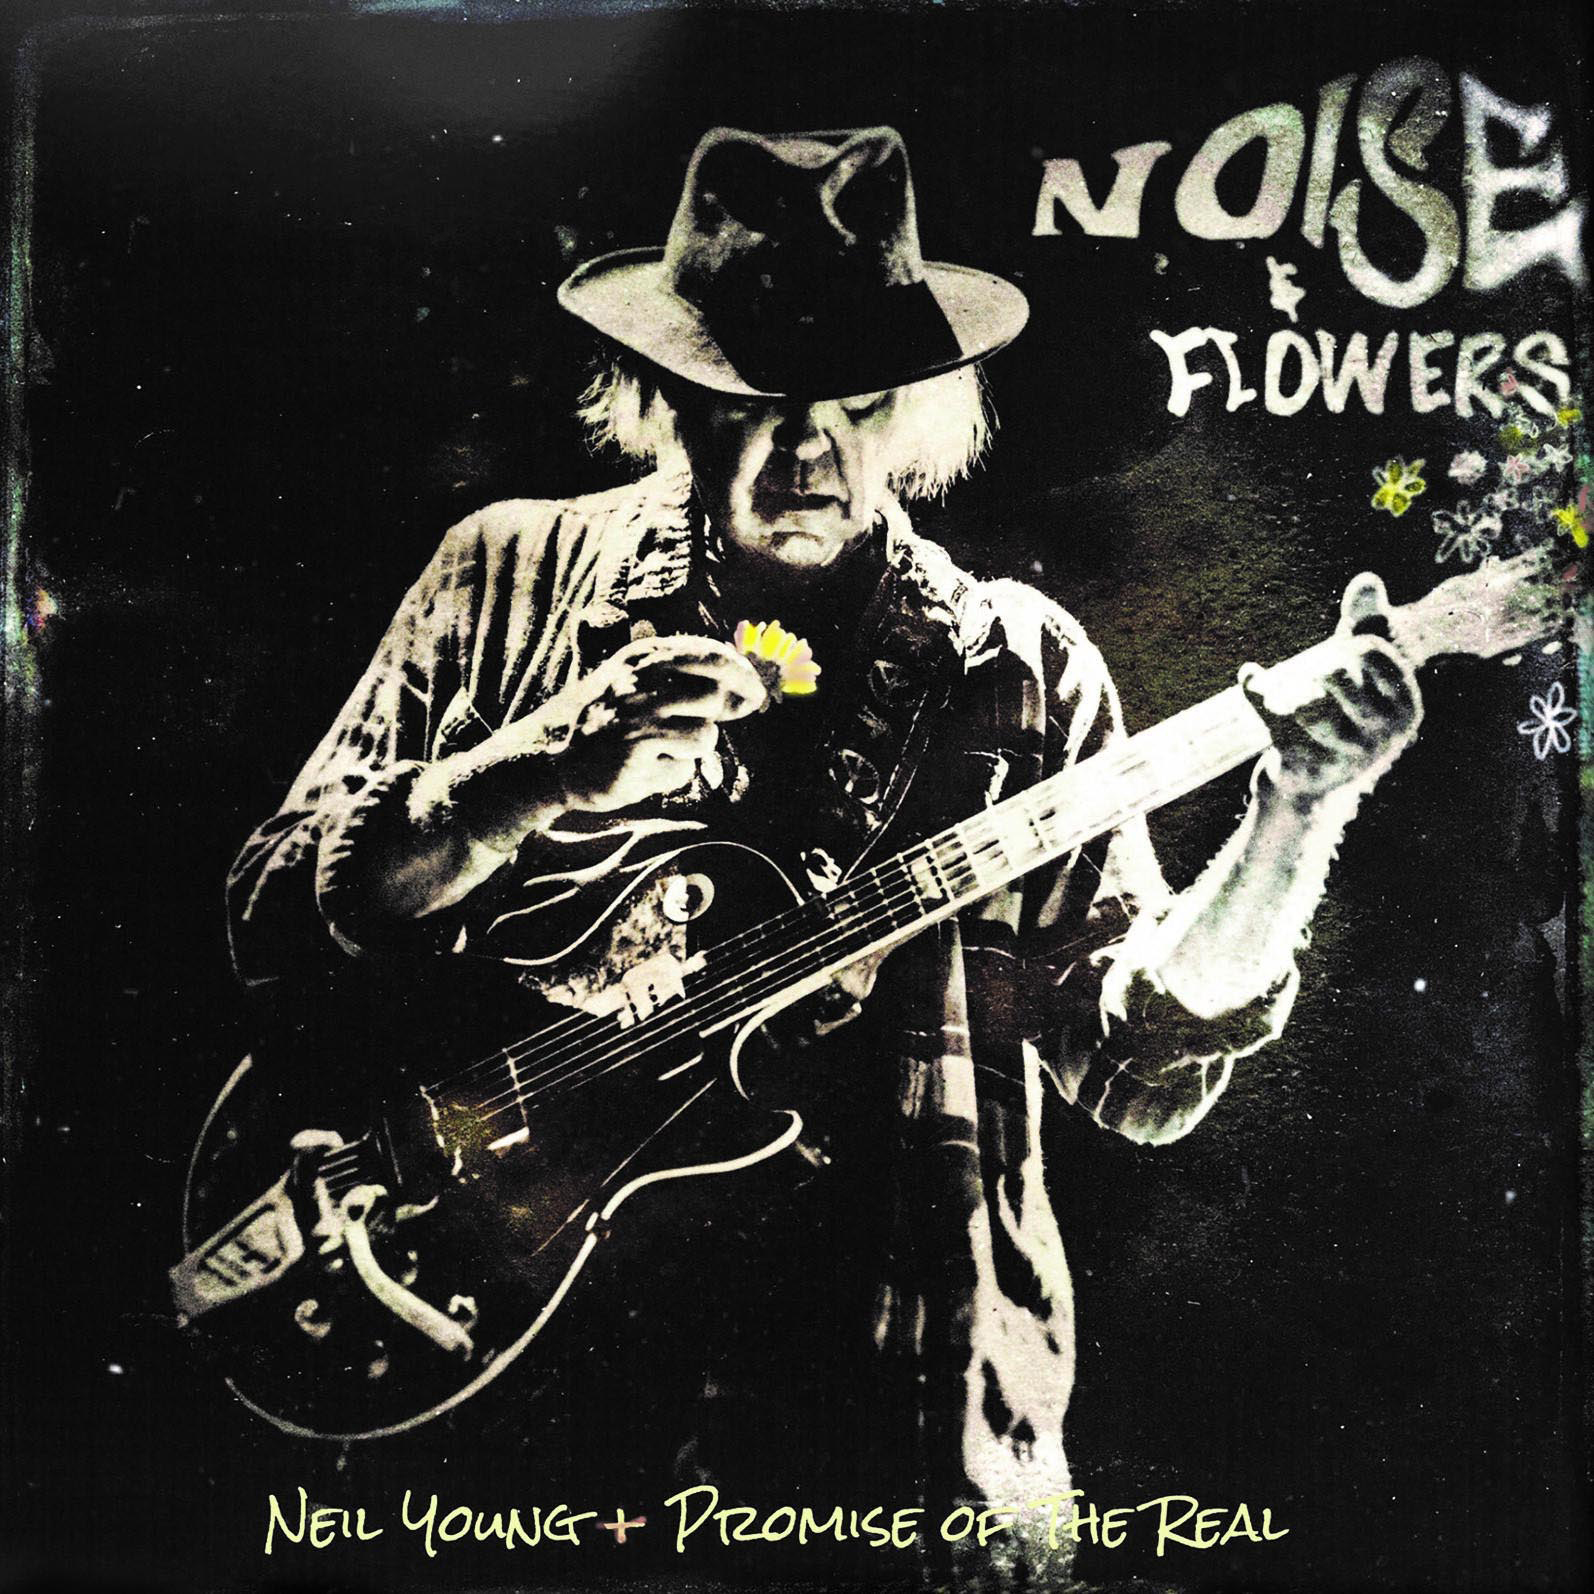 Neil Young + Of Promise Real FLOWERS The And set) - NOISE - (Box